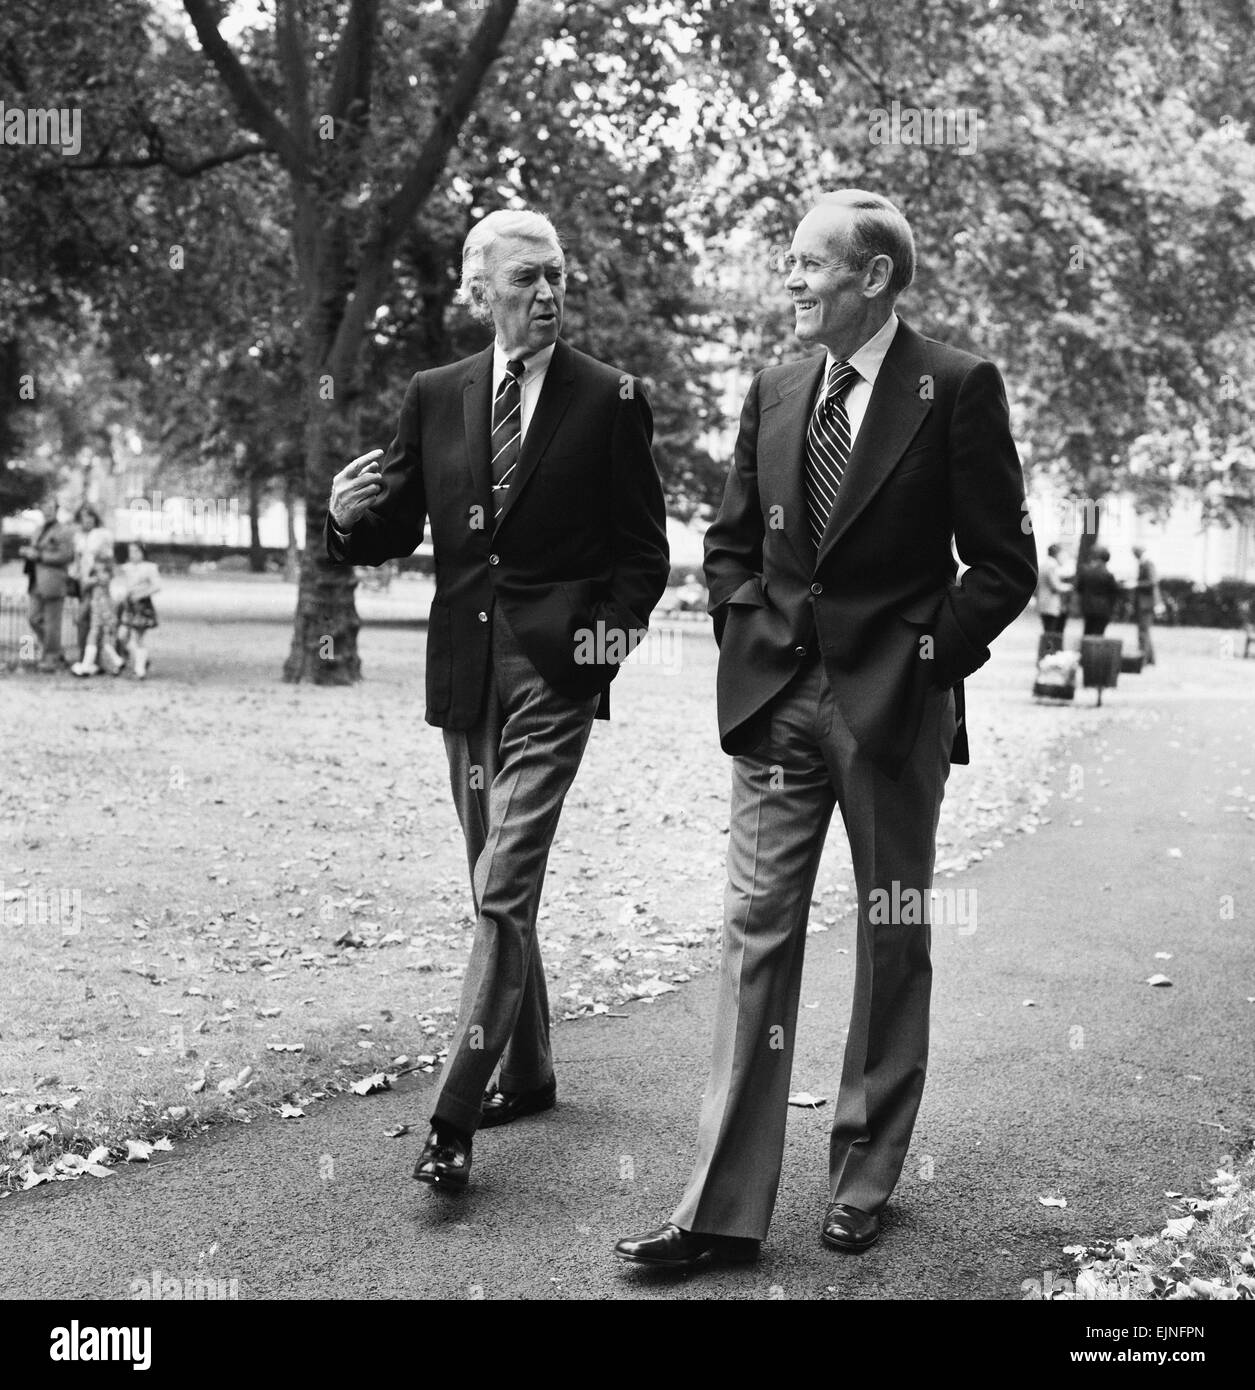 Hollywood stars Henry Fonda and James Stewart walk through Grosvenor Square in London. They are both in London for different stage productions; Henry Fonda is in Clarence Darrow and James Stewart is in the comedy classic Harvey. 11th August 1975. Stock Photo